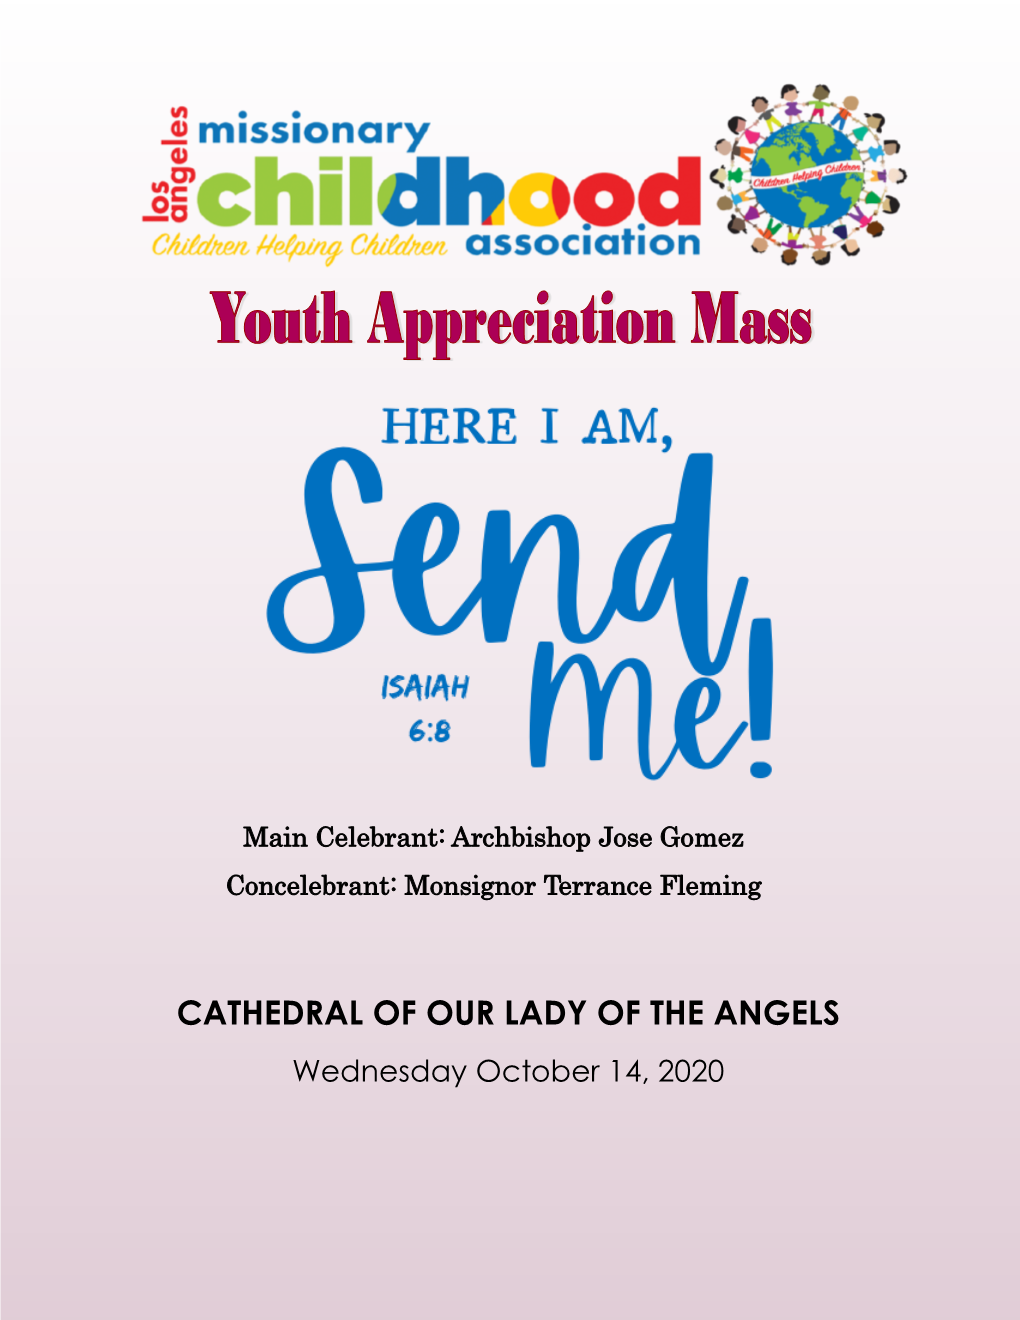 CATHEDRAL of OUR LADY of the ANGELS Wednesday October 14, 2020 a Very Warm Welcome to Everyone— Especially to All Our Young Missionaries That Join Us Today